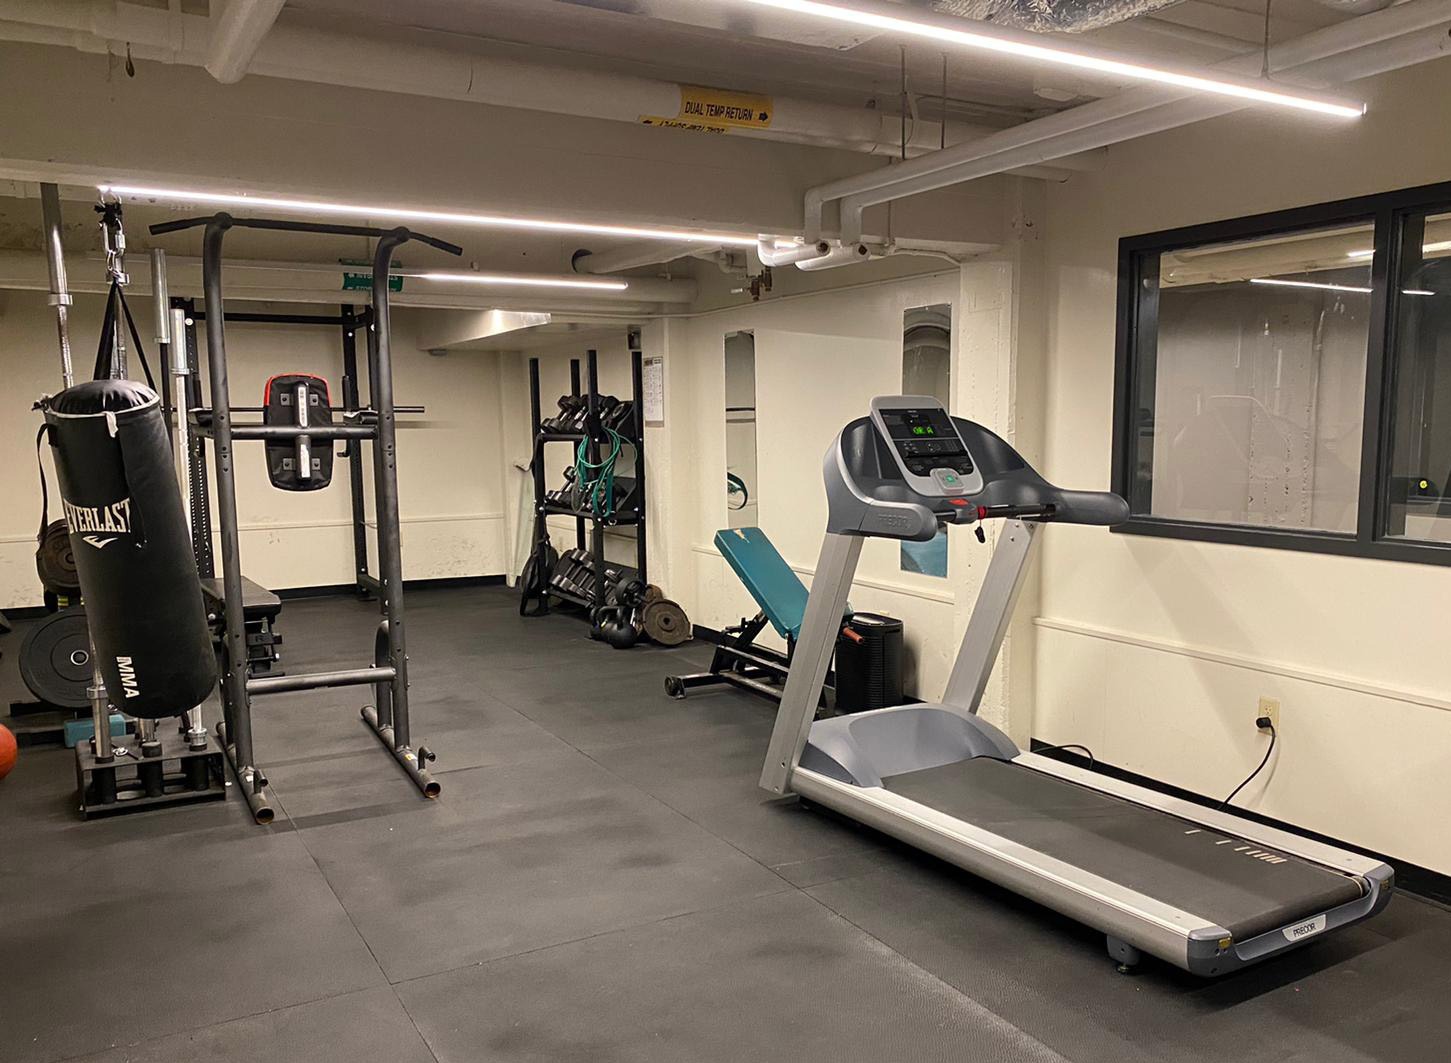 A fitness room with treadmill and weightlifting equipment